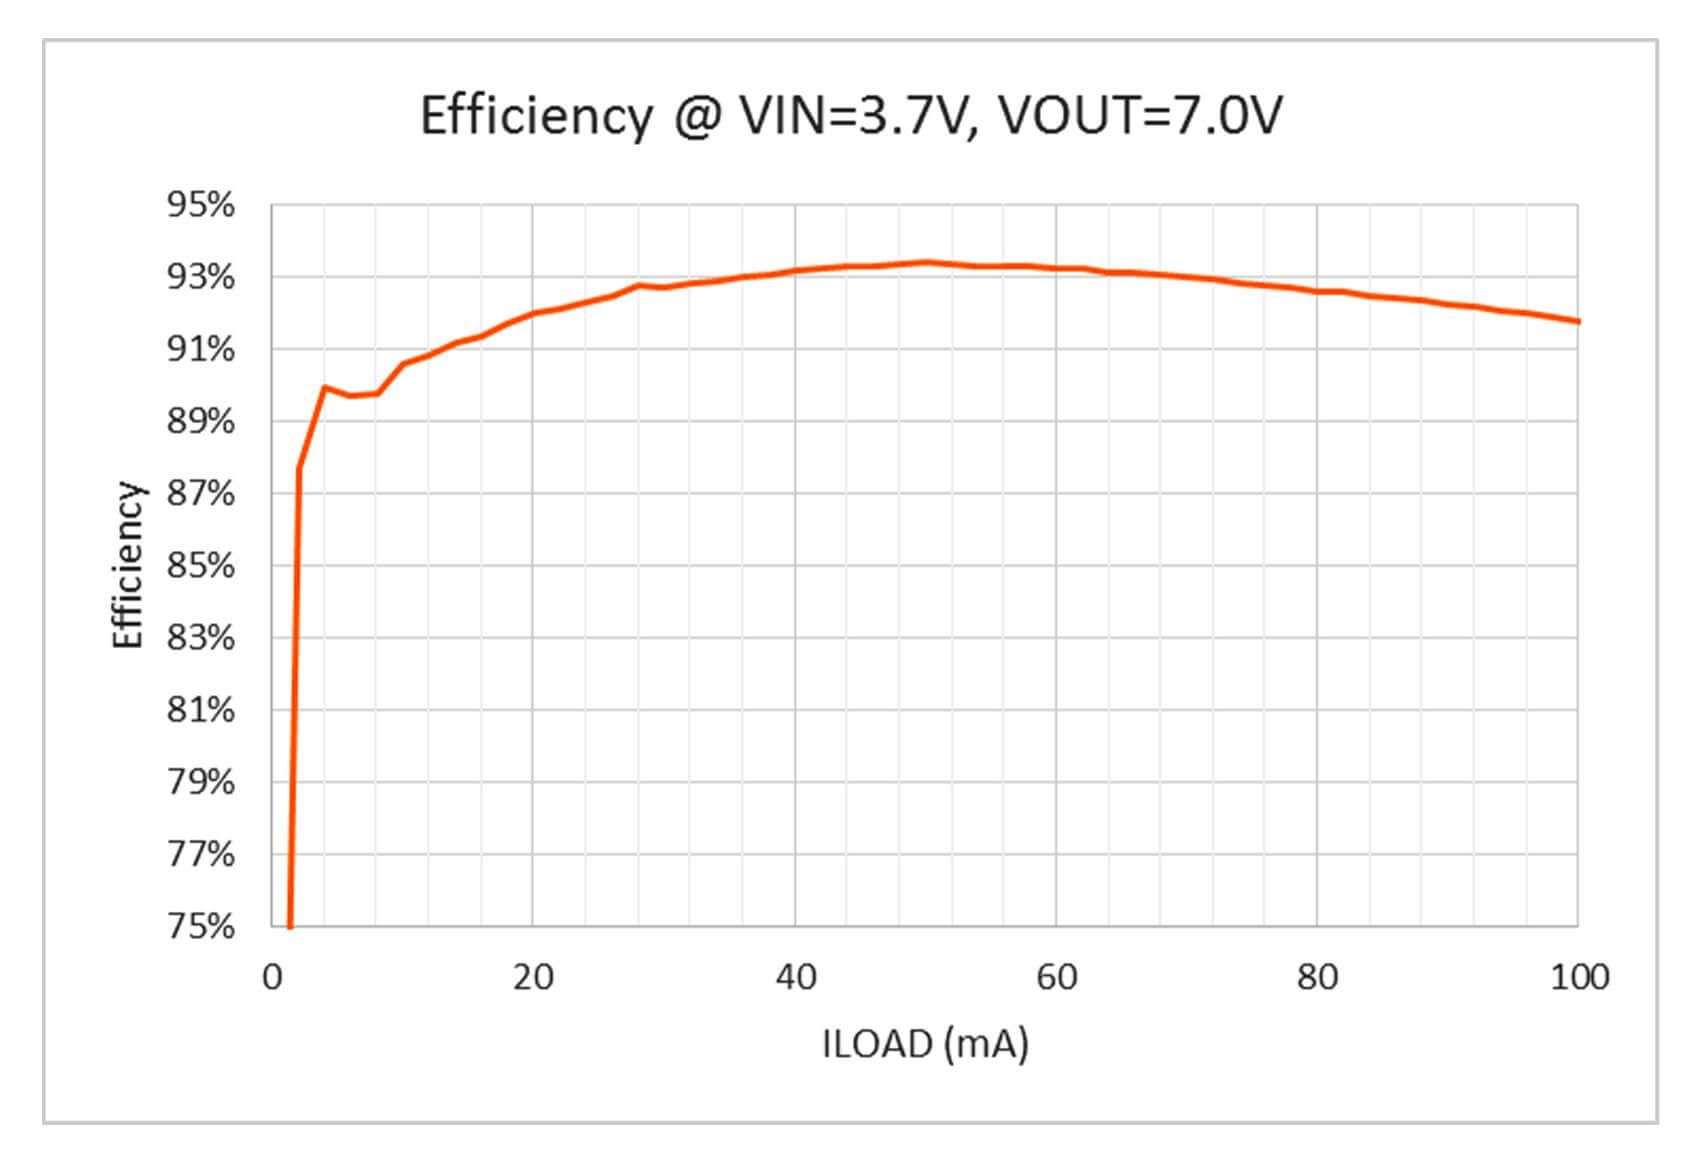 The efficiency under different load current